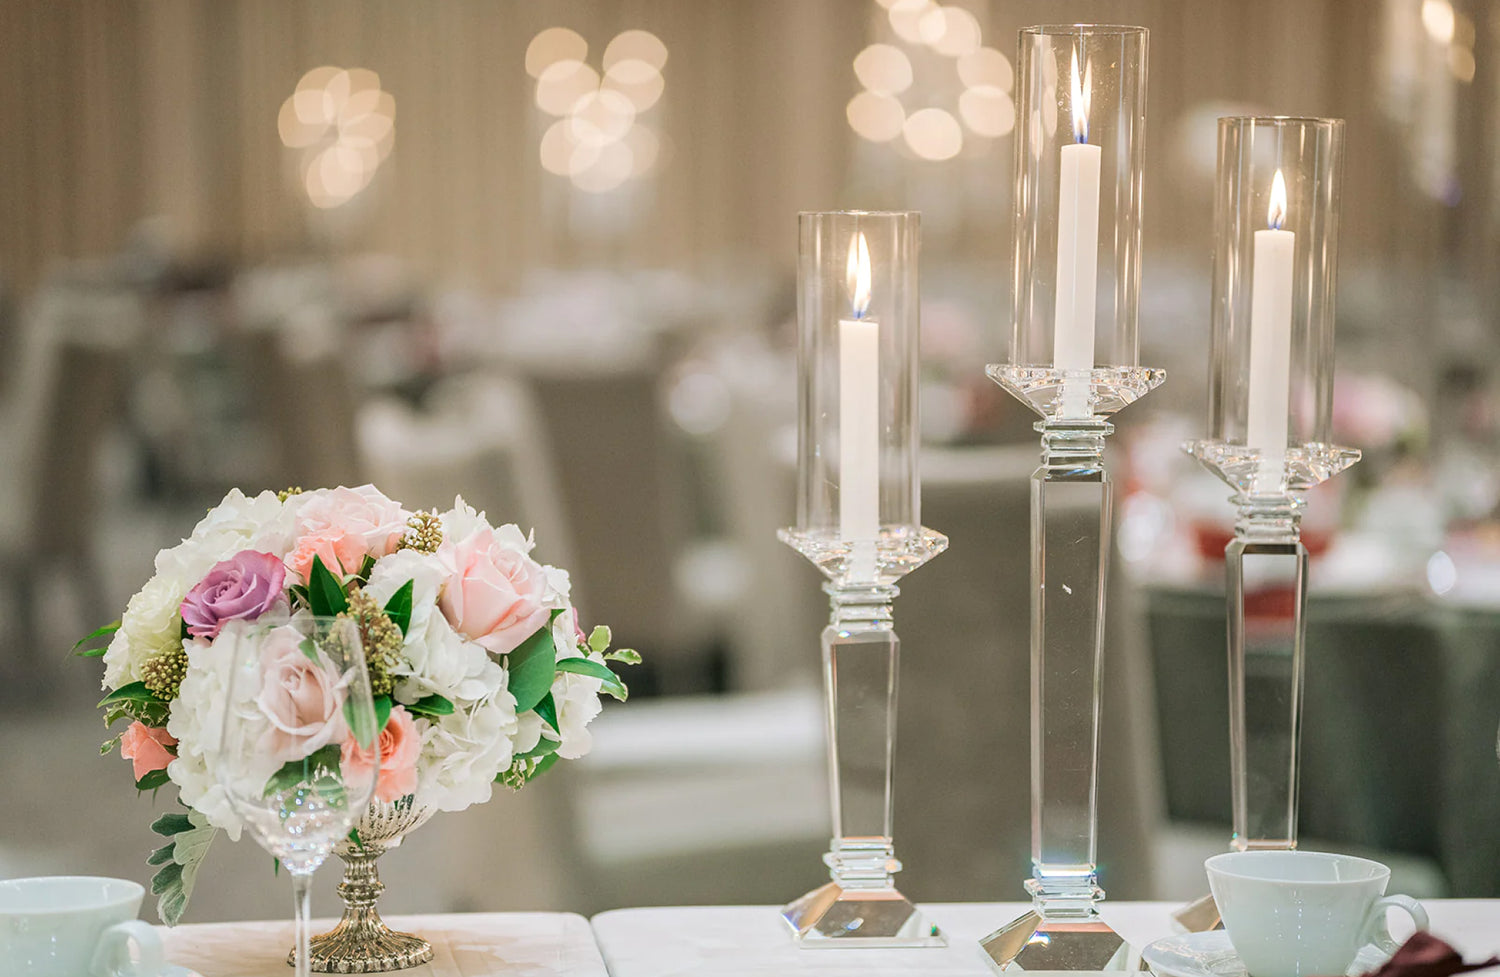 Light Up Love: How to Perfectly Decorate Wedding Tables with Candles!